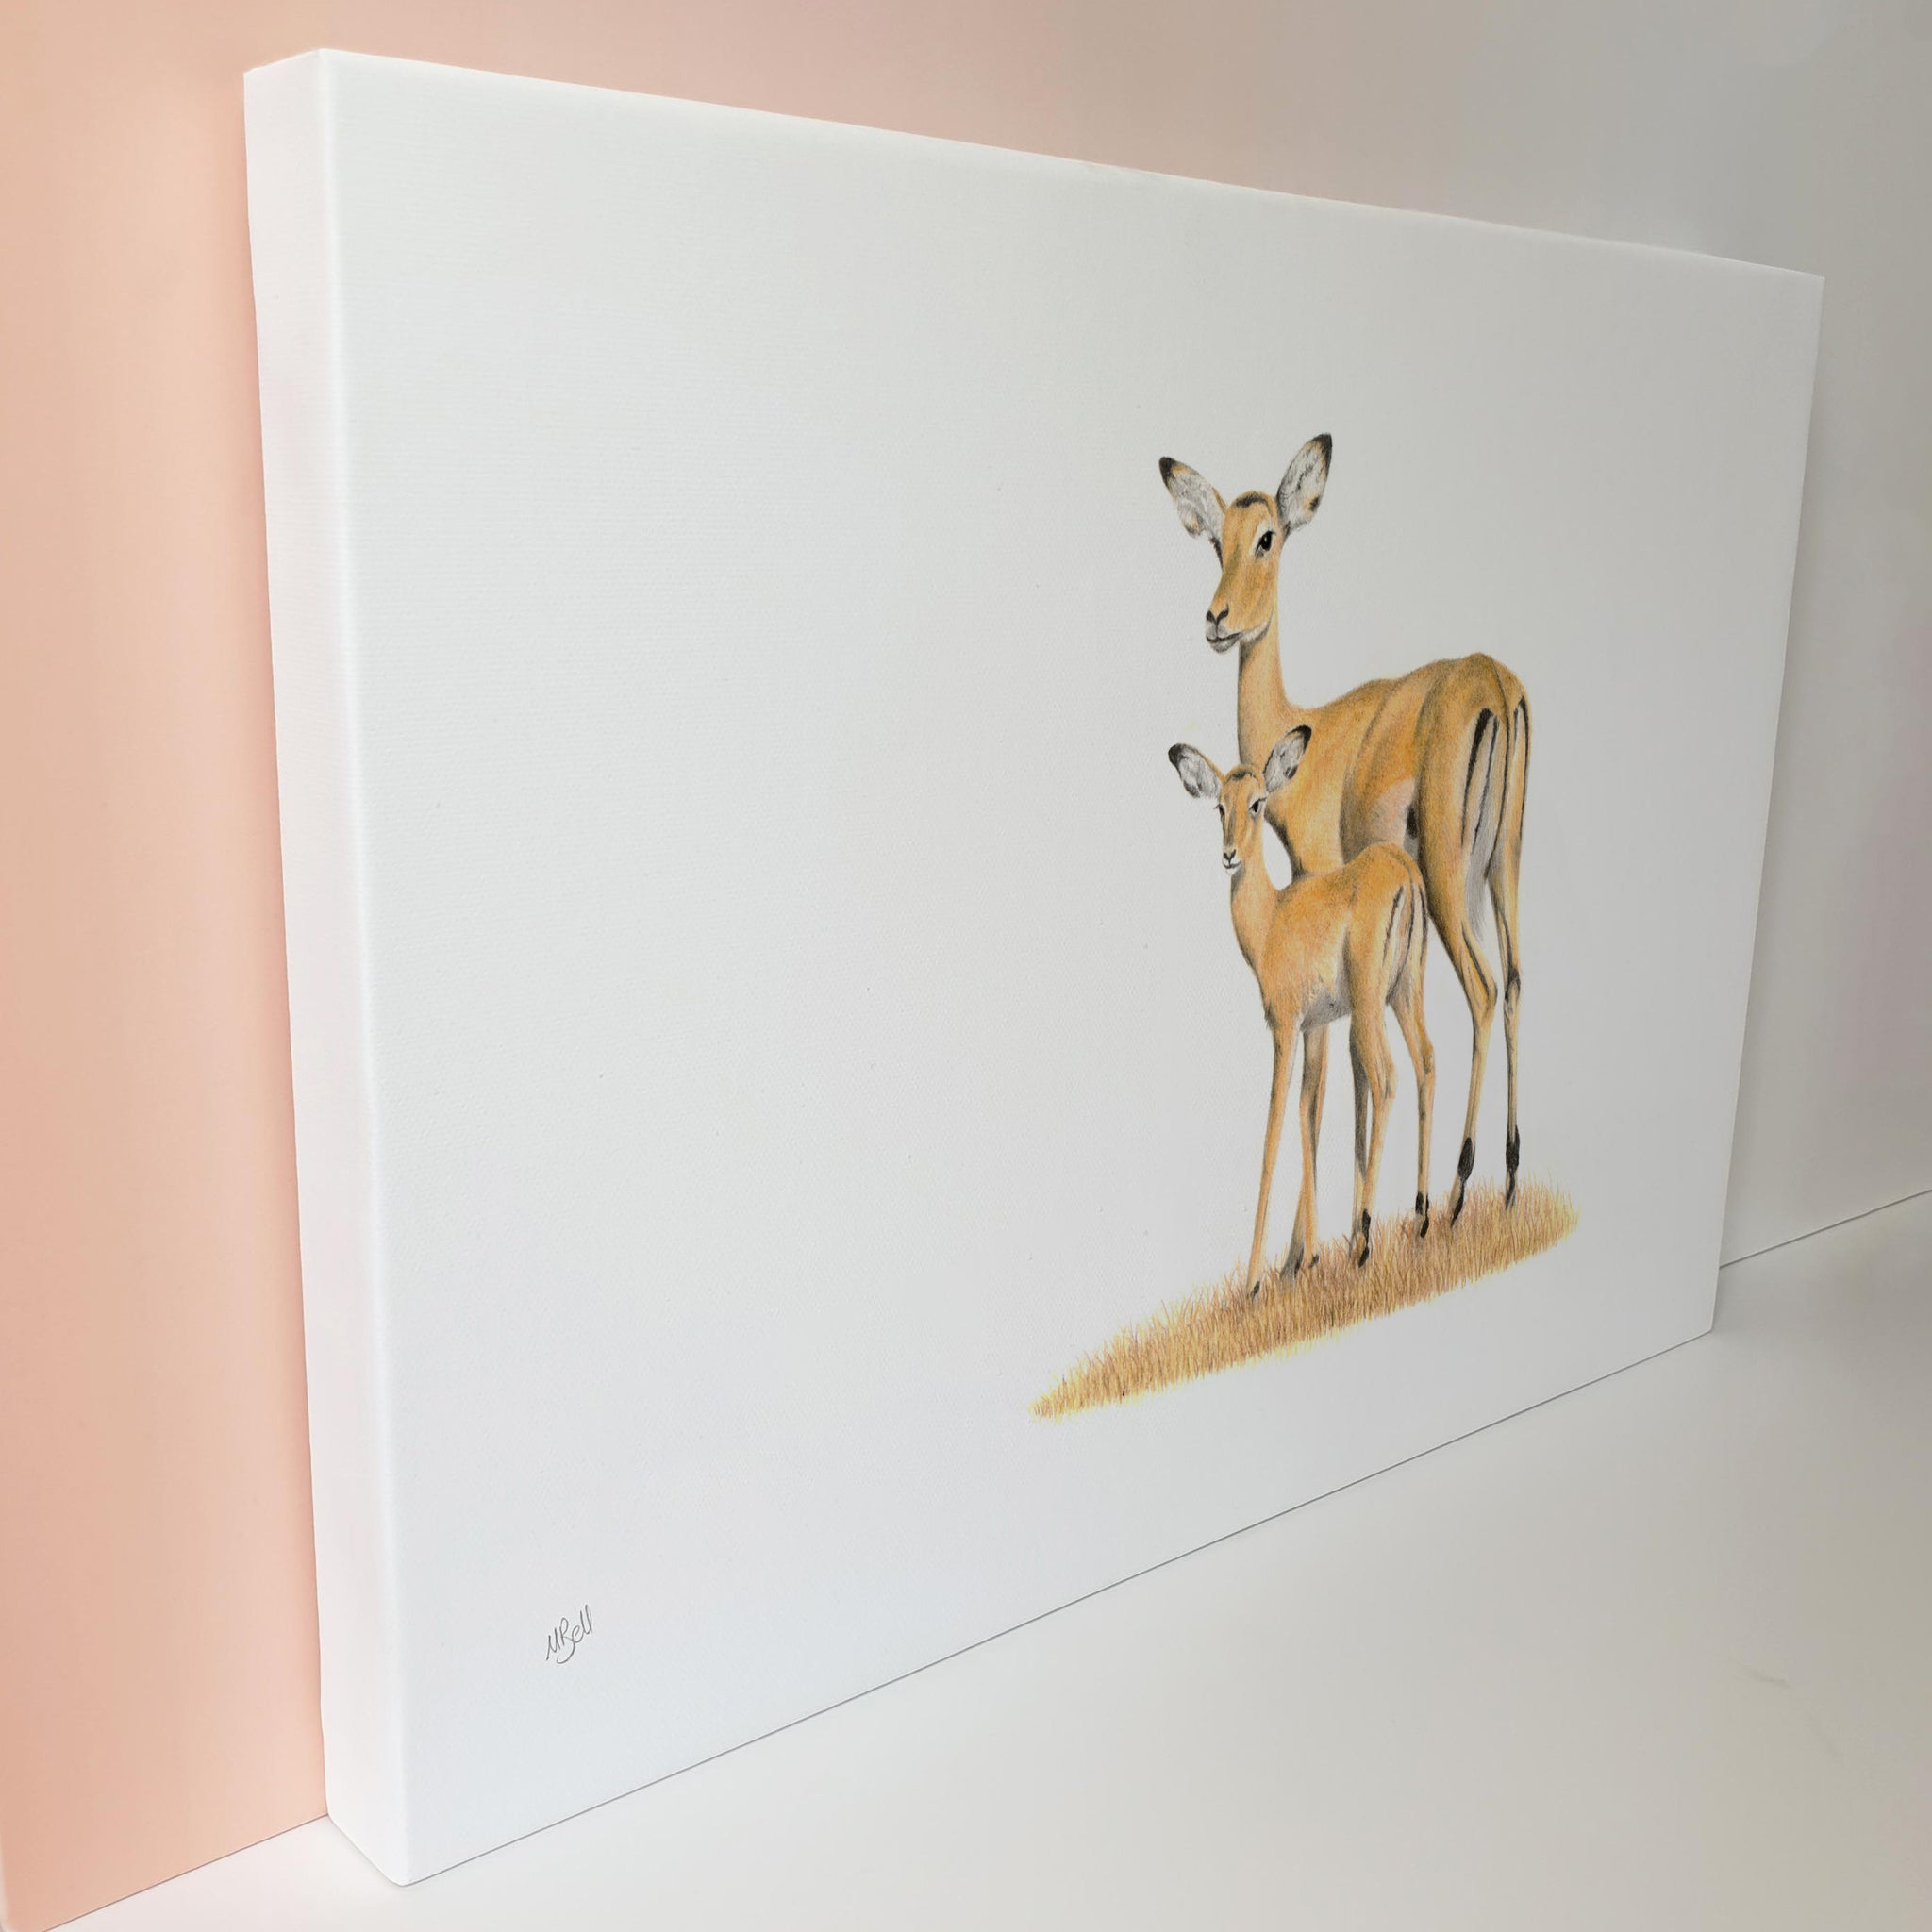 Mother and baby impalas on canvas artwork